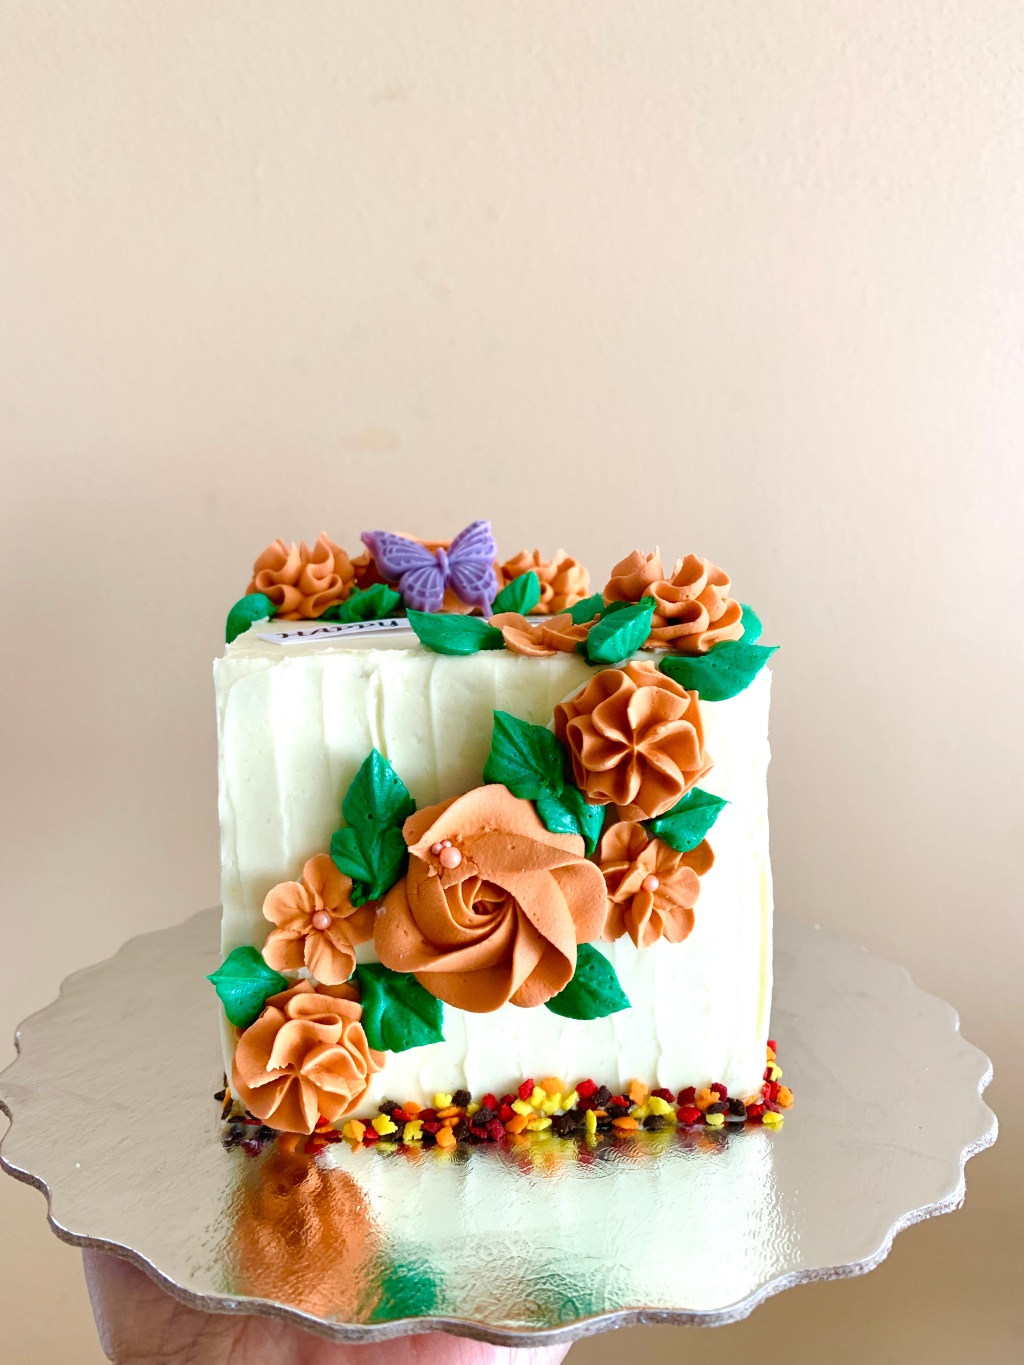 Birthday Cake with Royal icing flowers.